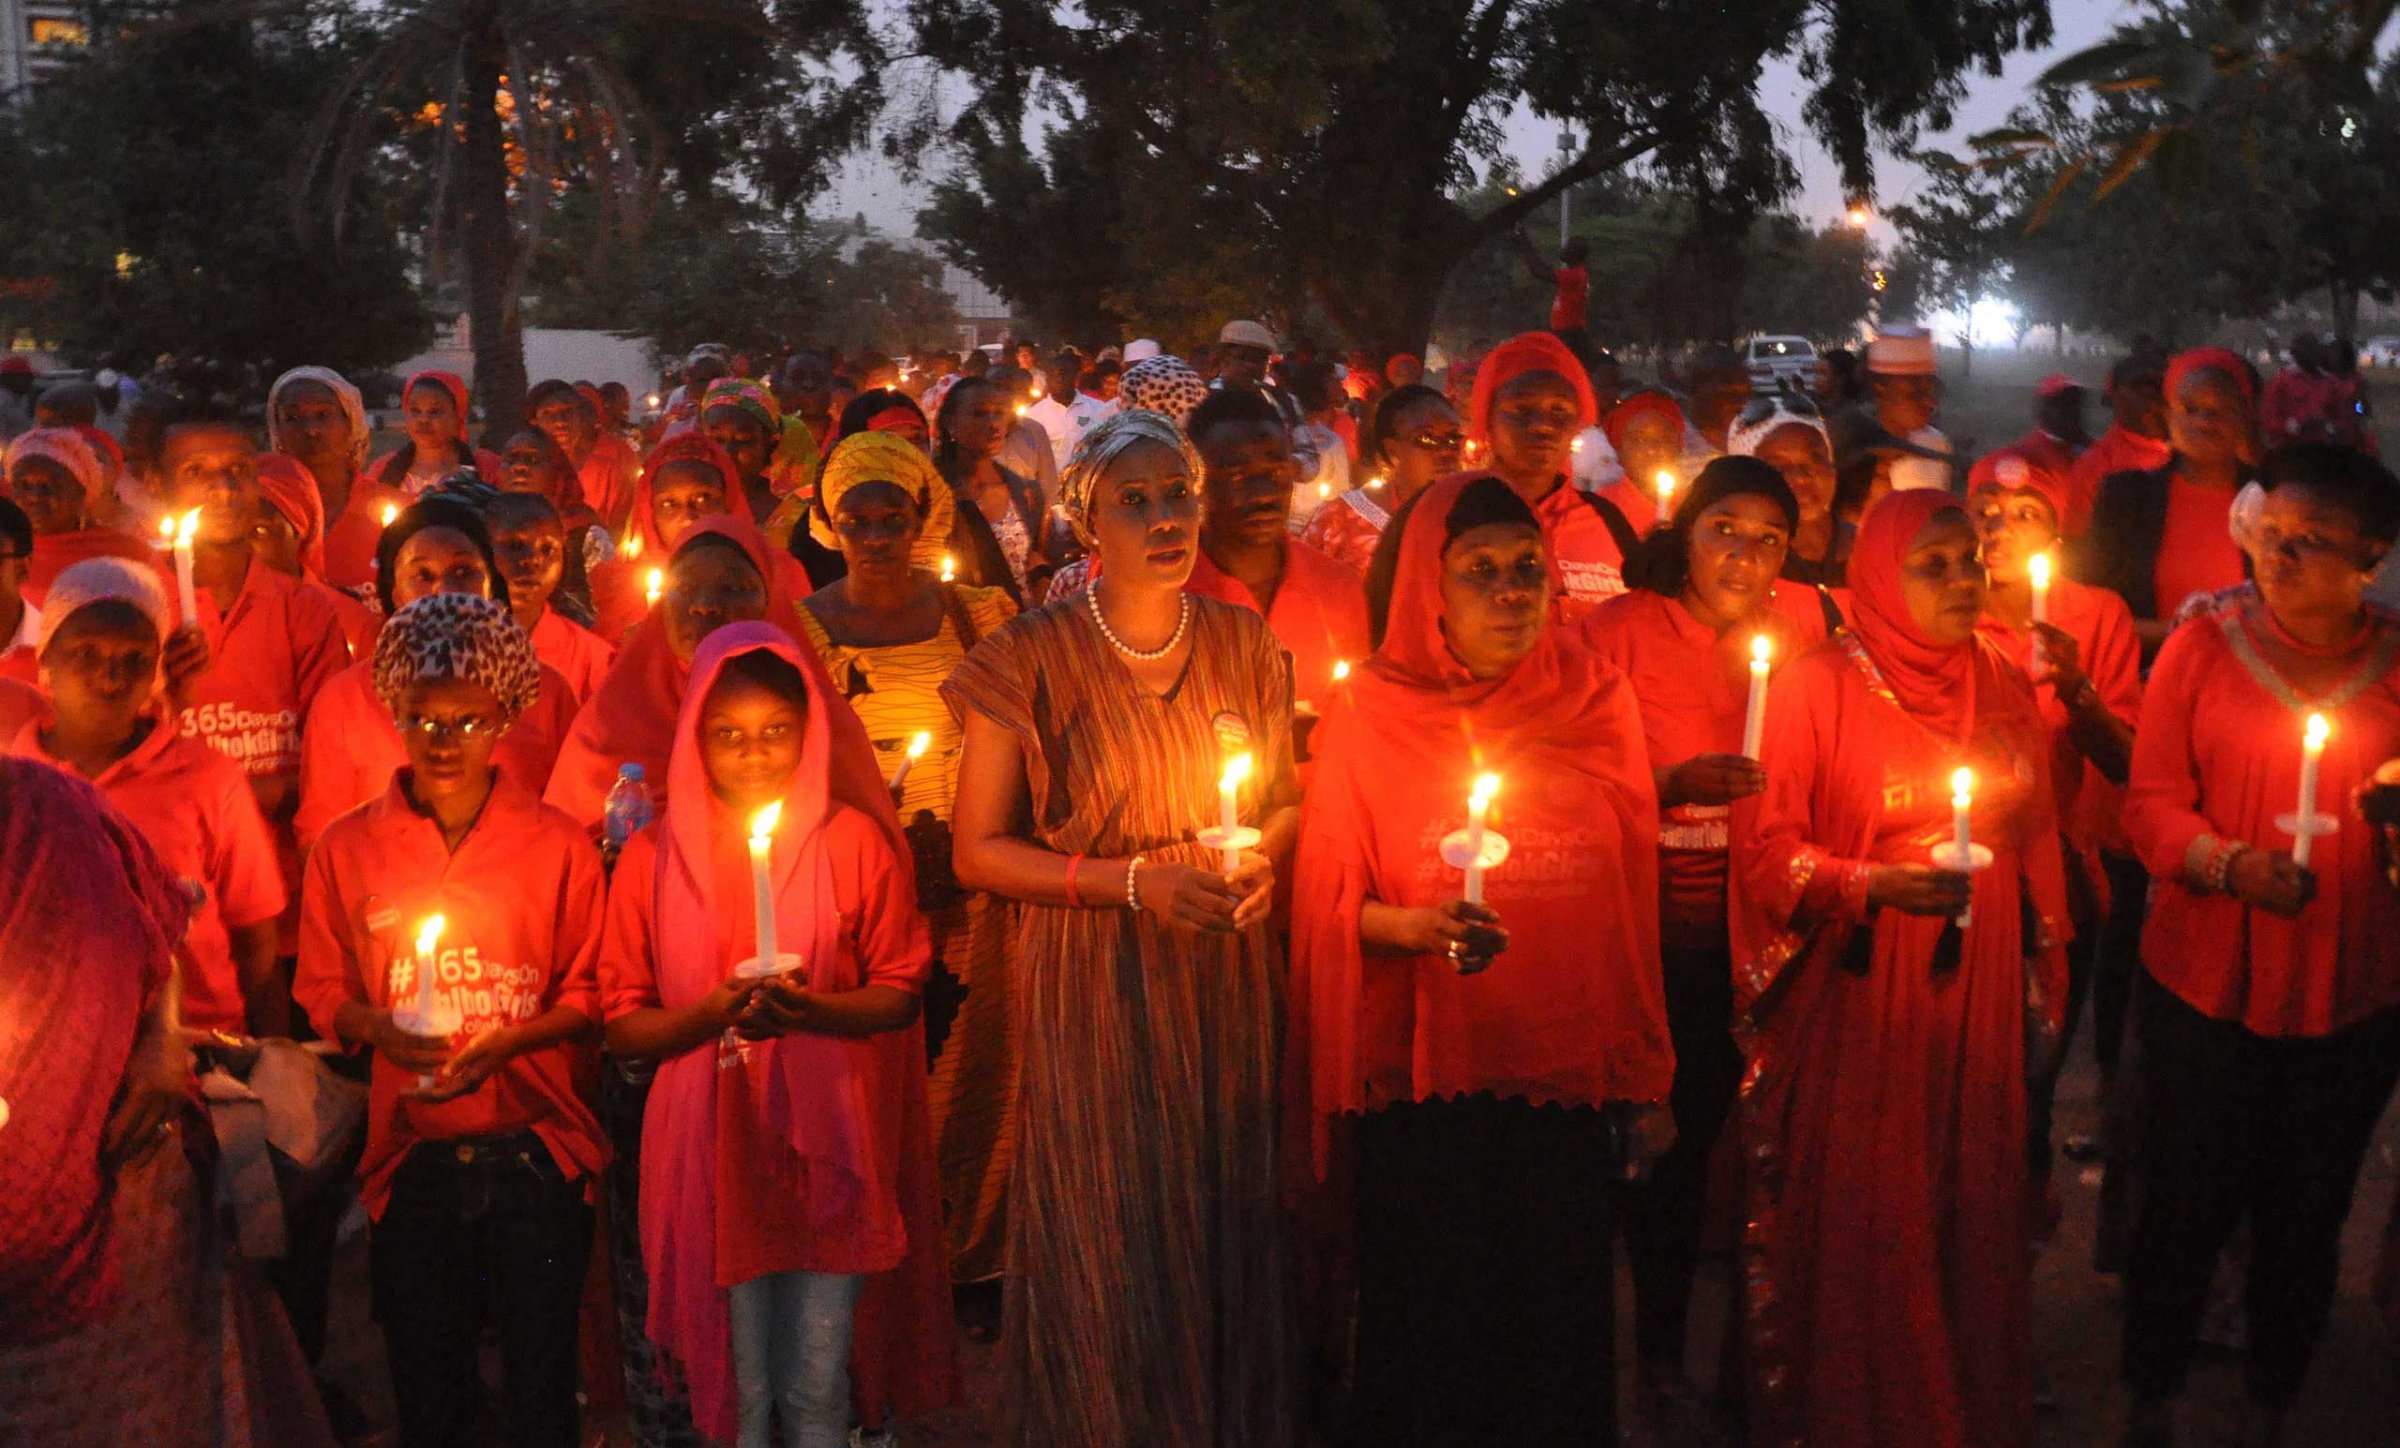 Nigerians holding candles during a vigil for the one year anniversary of the kidnapping of hundreds of Nigerian school girls in Chibok, Abuja, Nigeria on April 14, 2015.